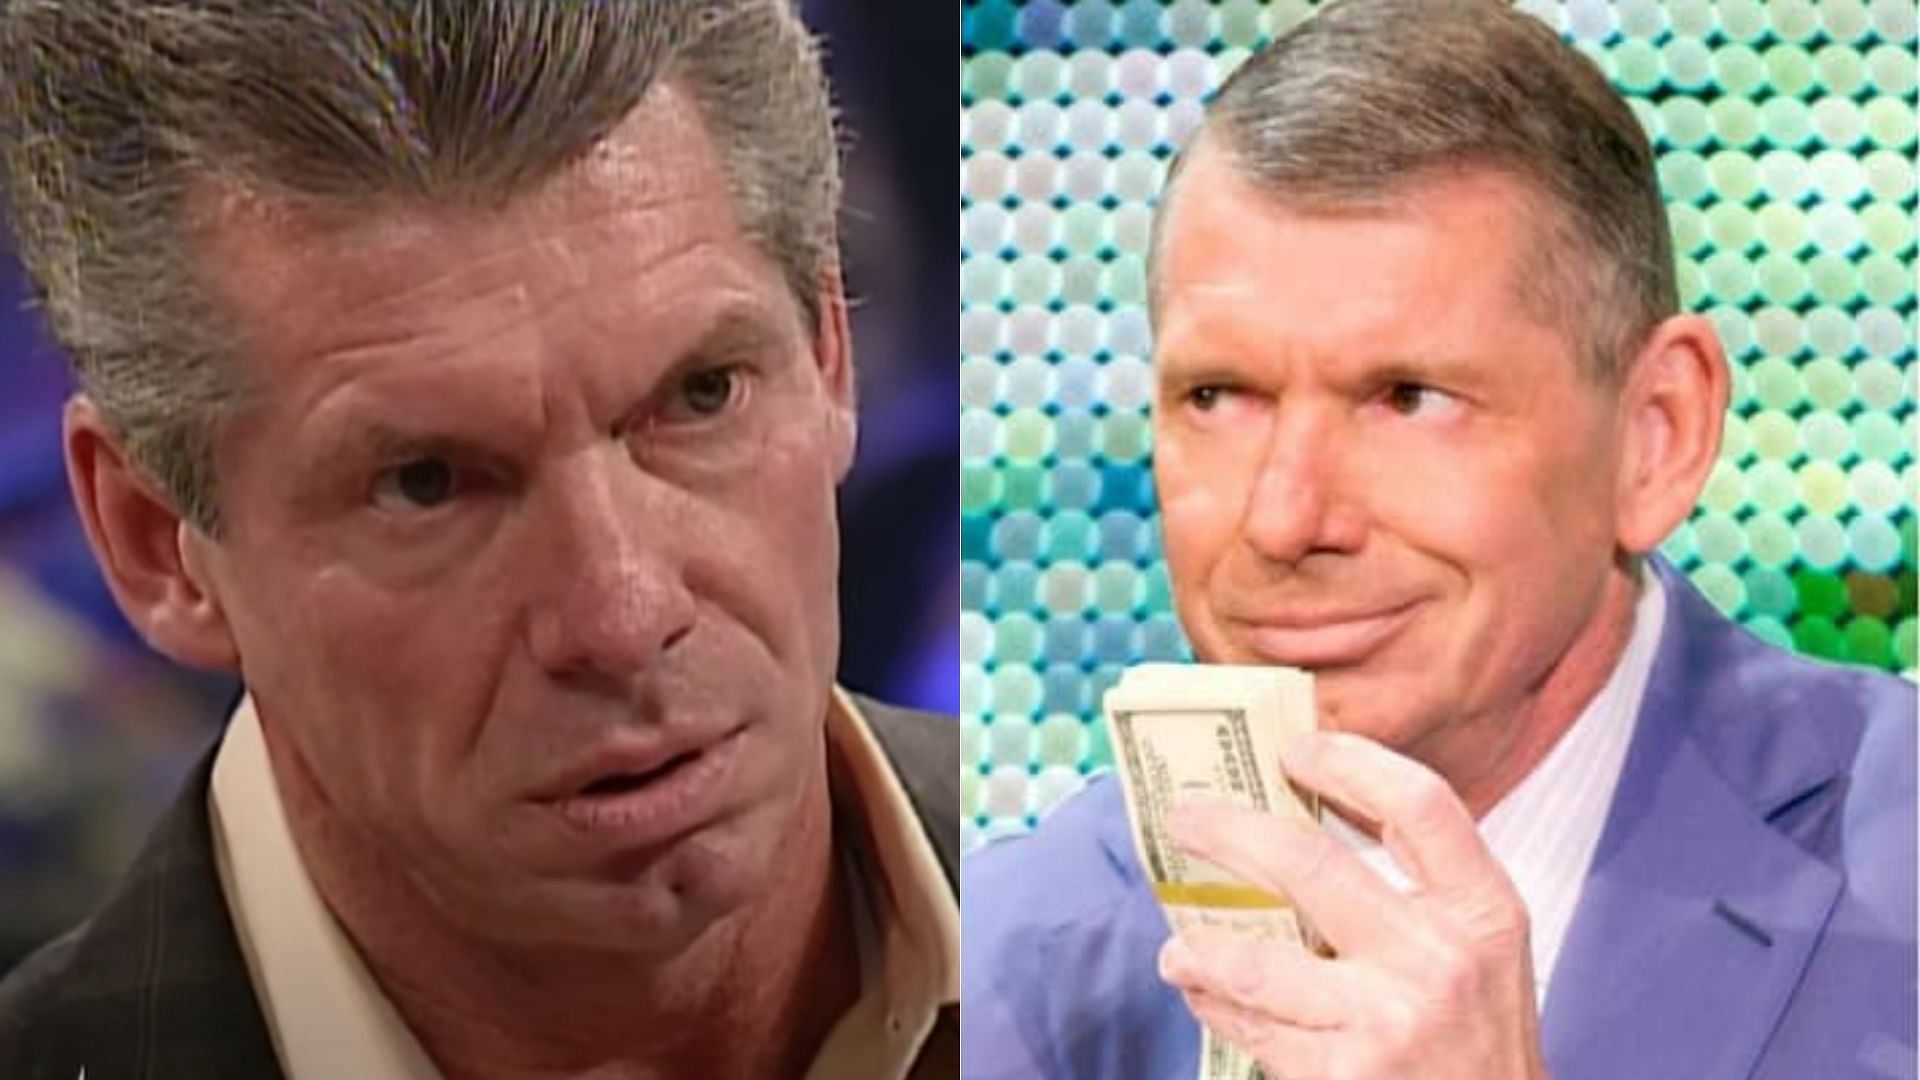 Vince McMahon was responsible for WWE storyline developments between 1982 and 2022.